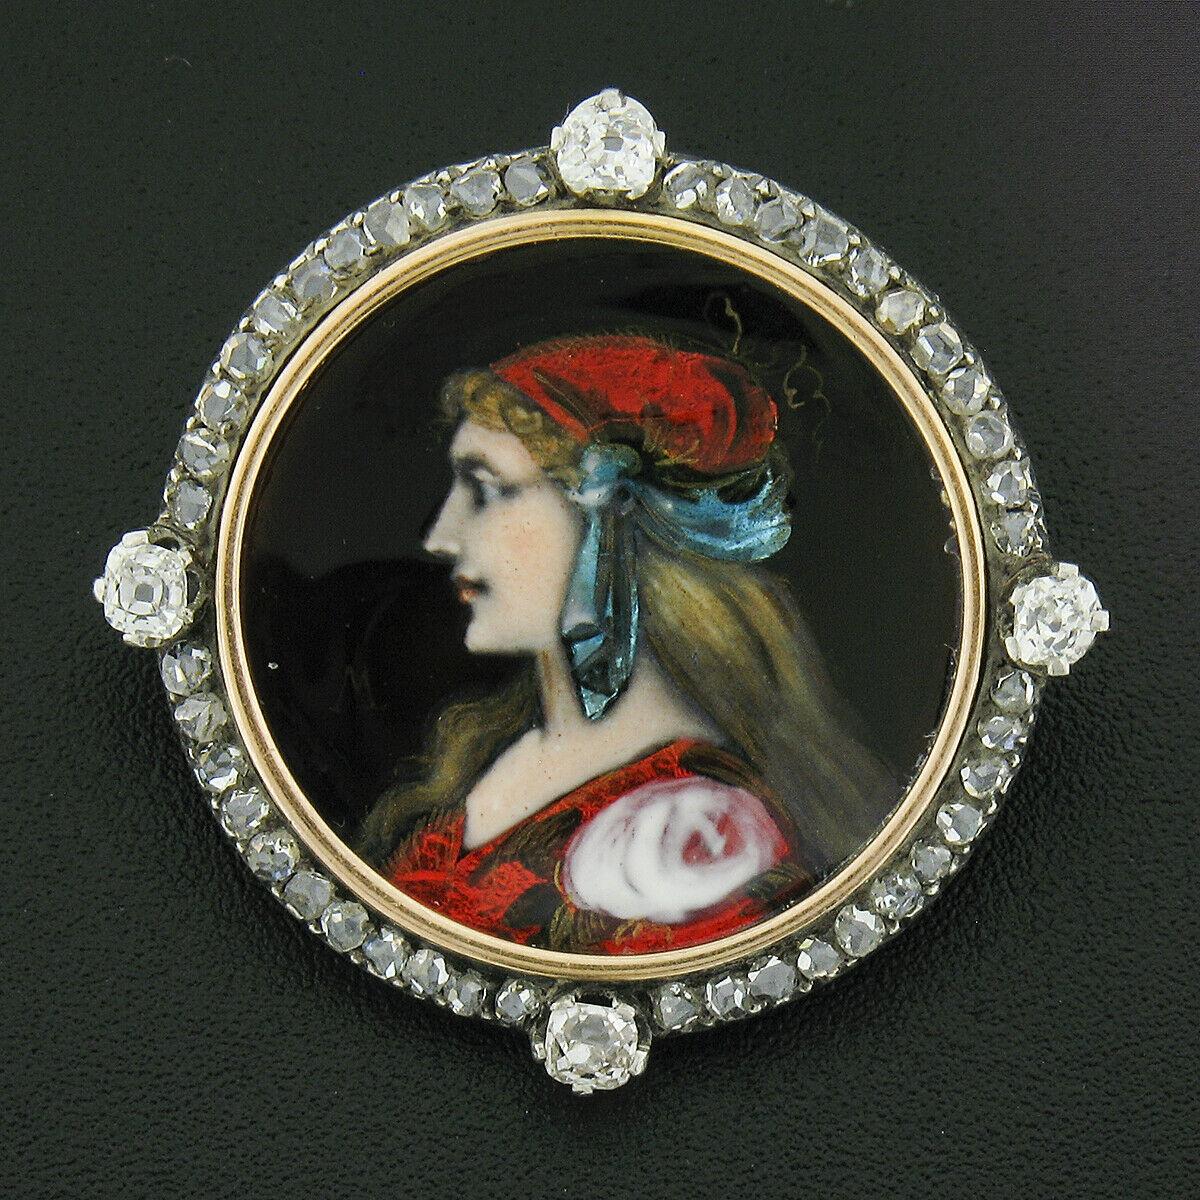 This gorgeous antique piece was crafted during the early Victorian era from solid 18k gold with a silver top and features an incredibly detailed hand enameled portrait at its center. The portrait displays a beautiful picture of a young lady with